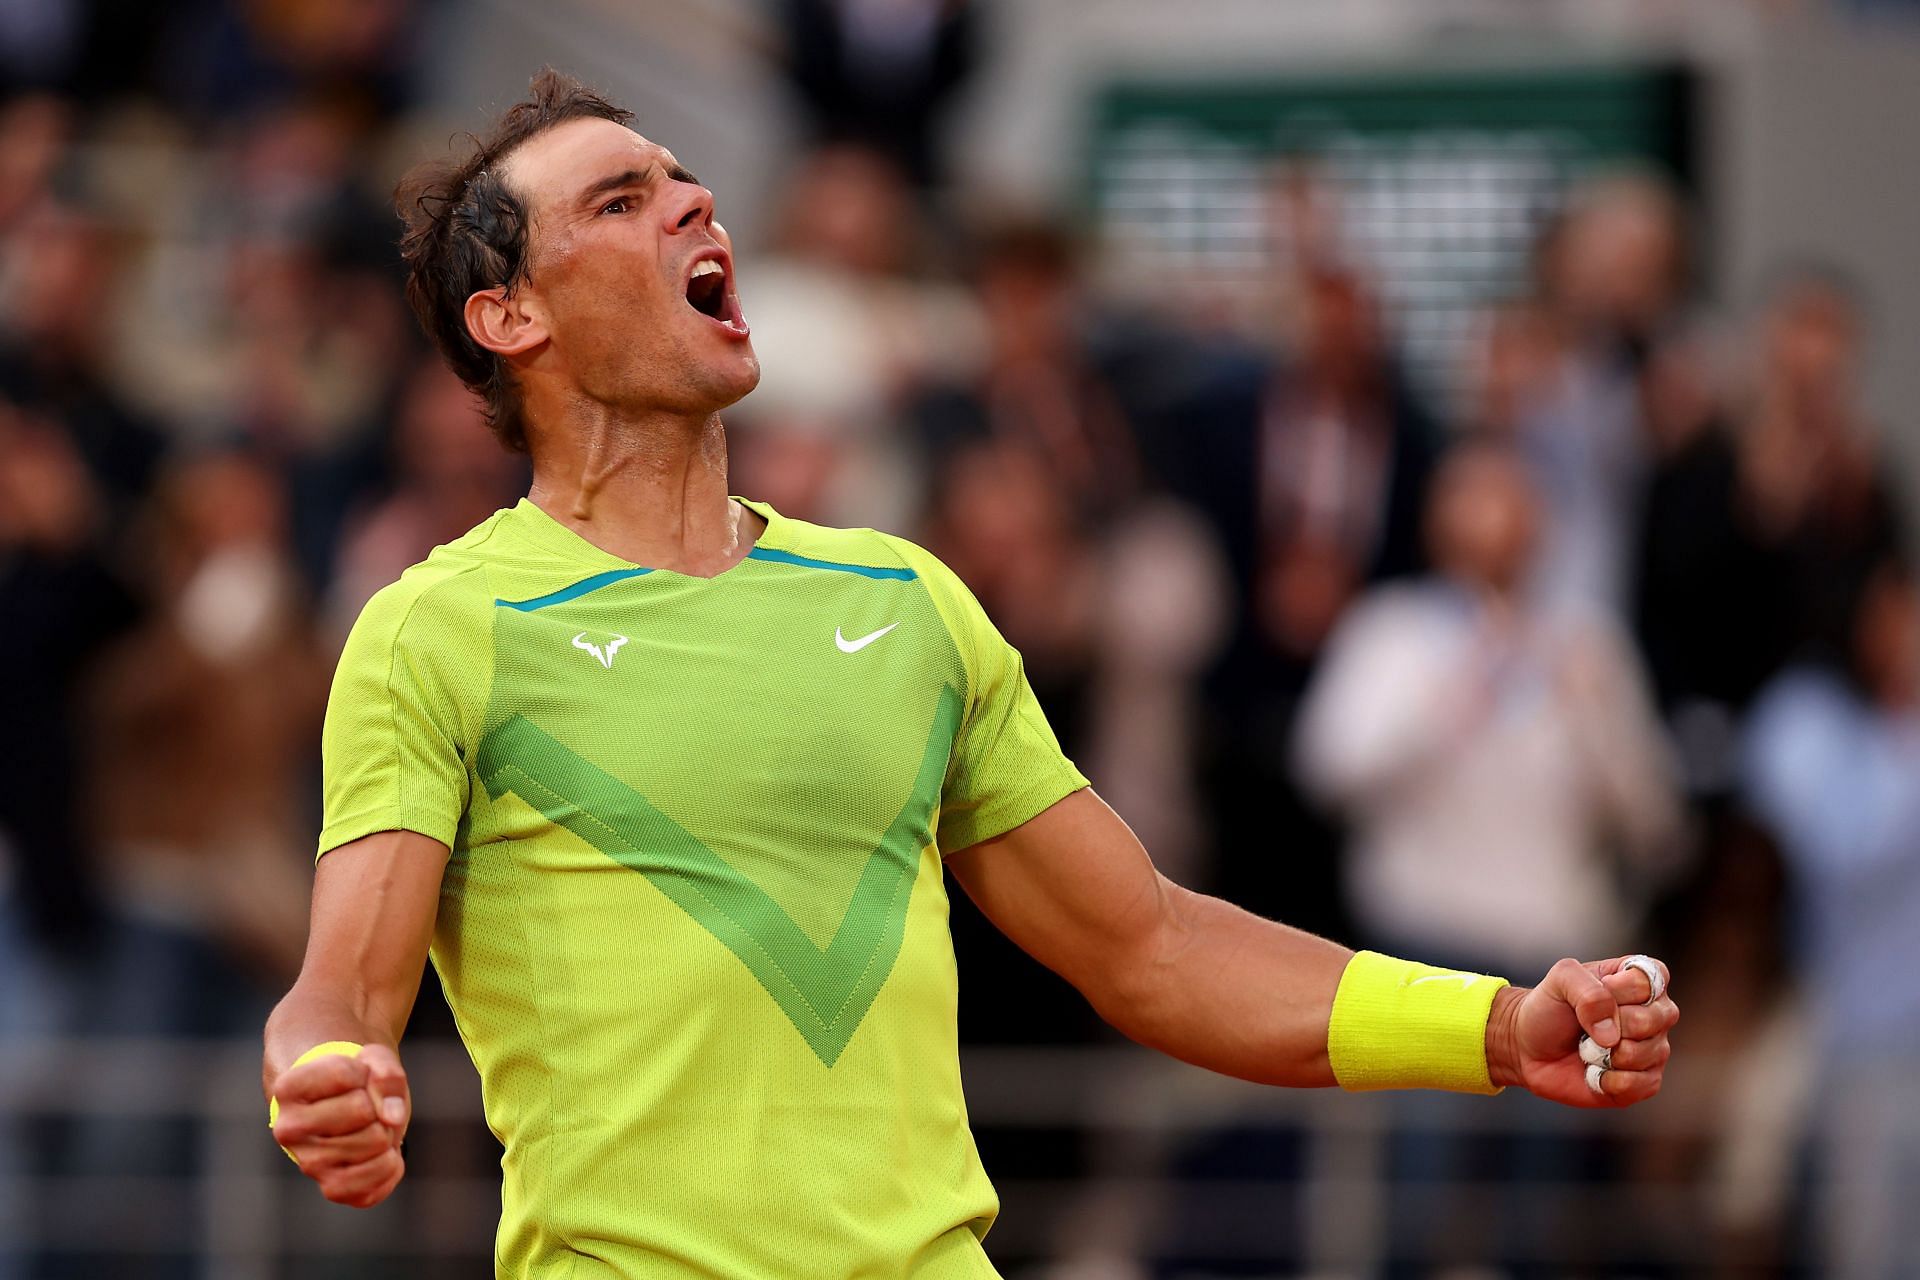 Rafael Nadal lets out a roar as he survives a five-set match for the third time at the French Open